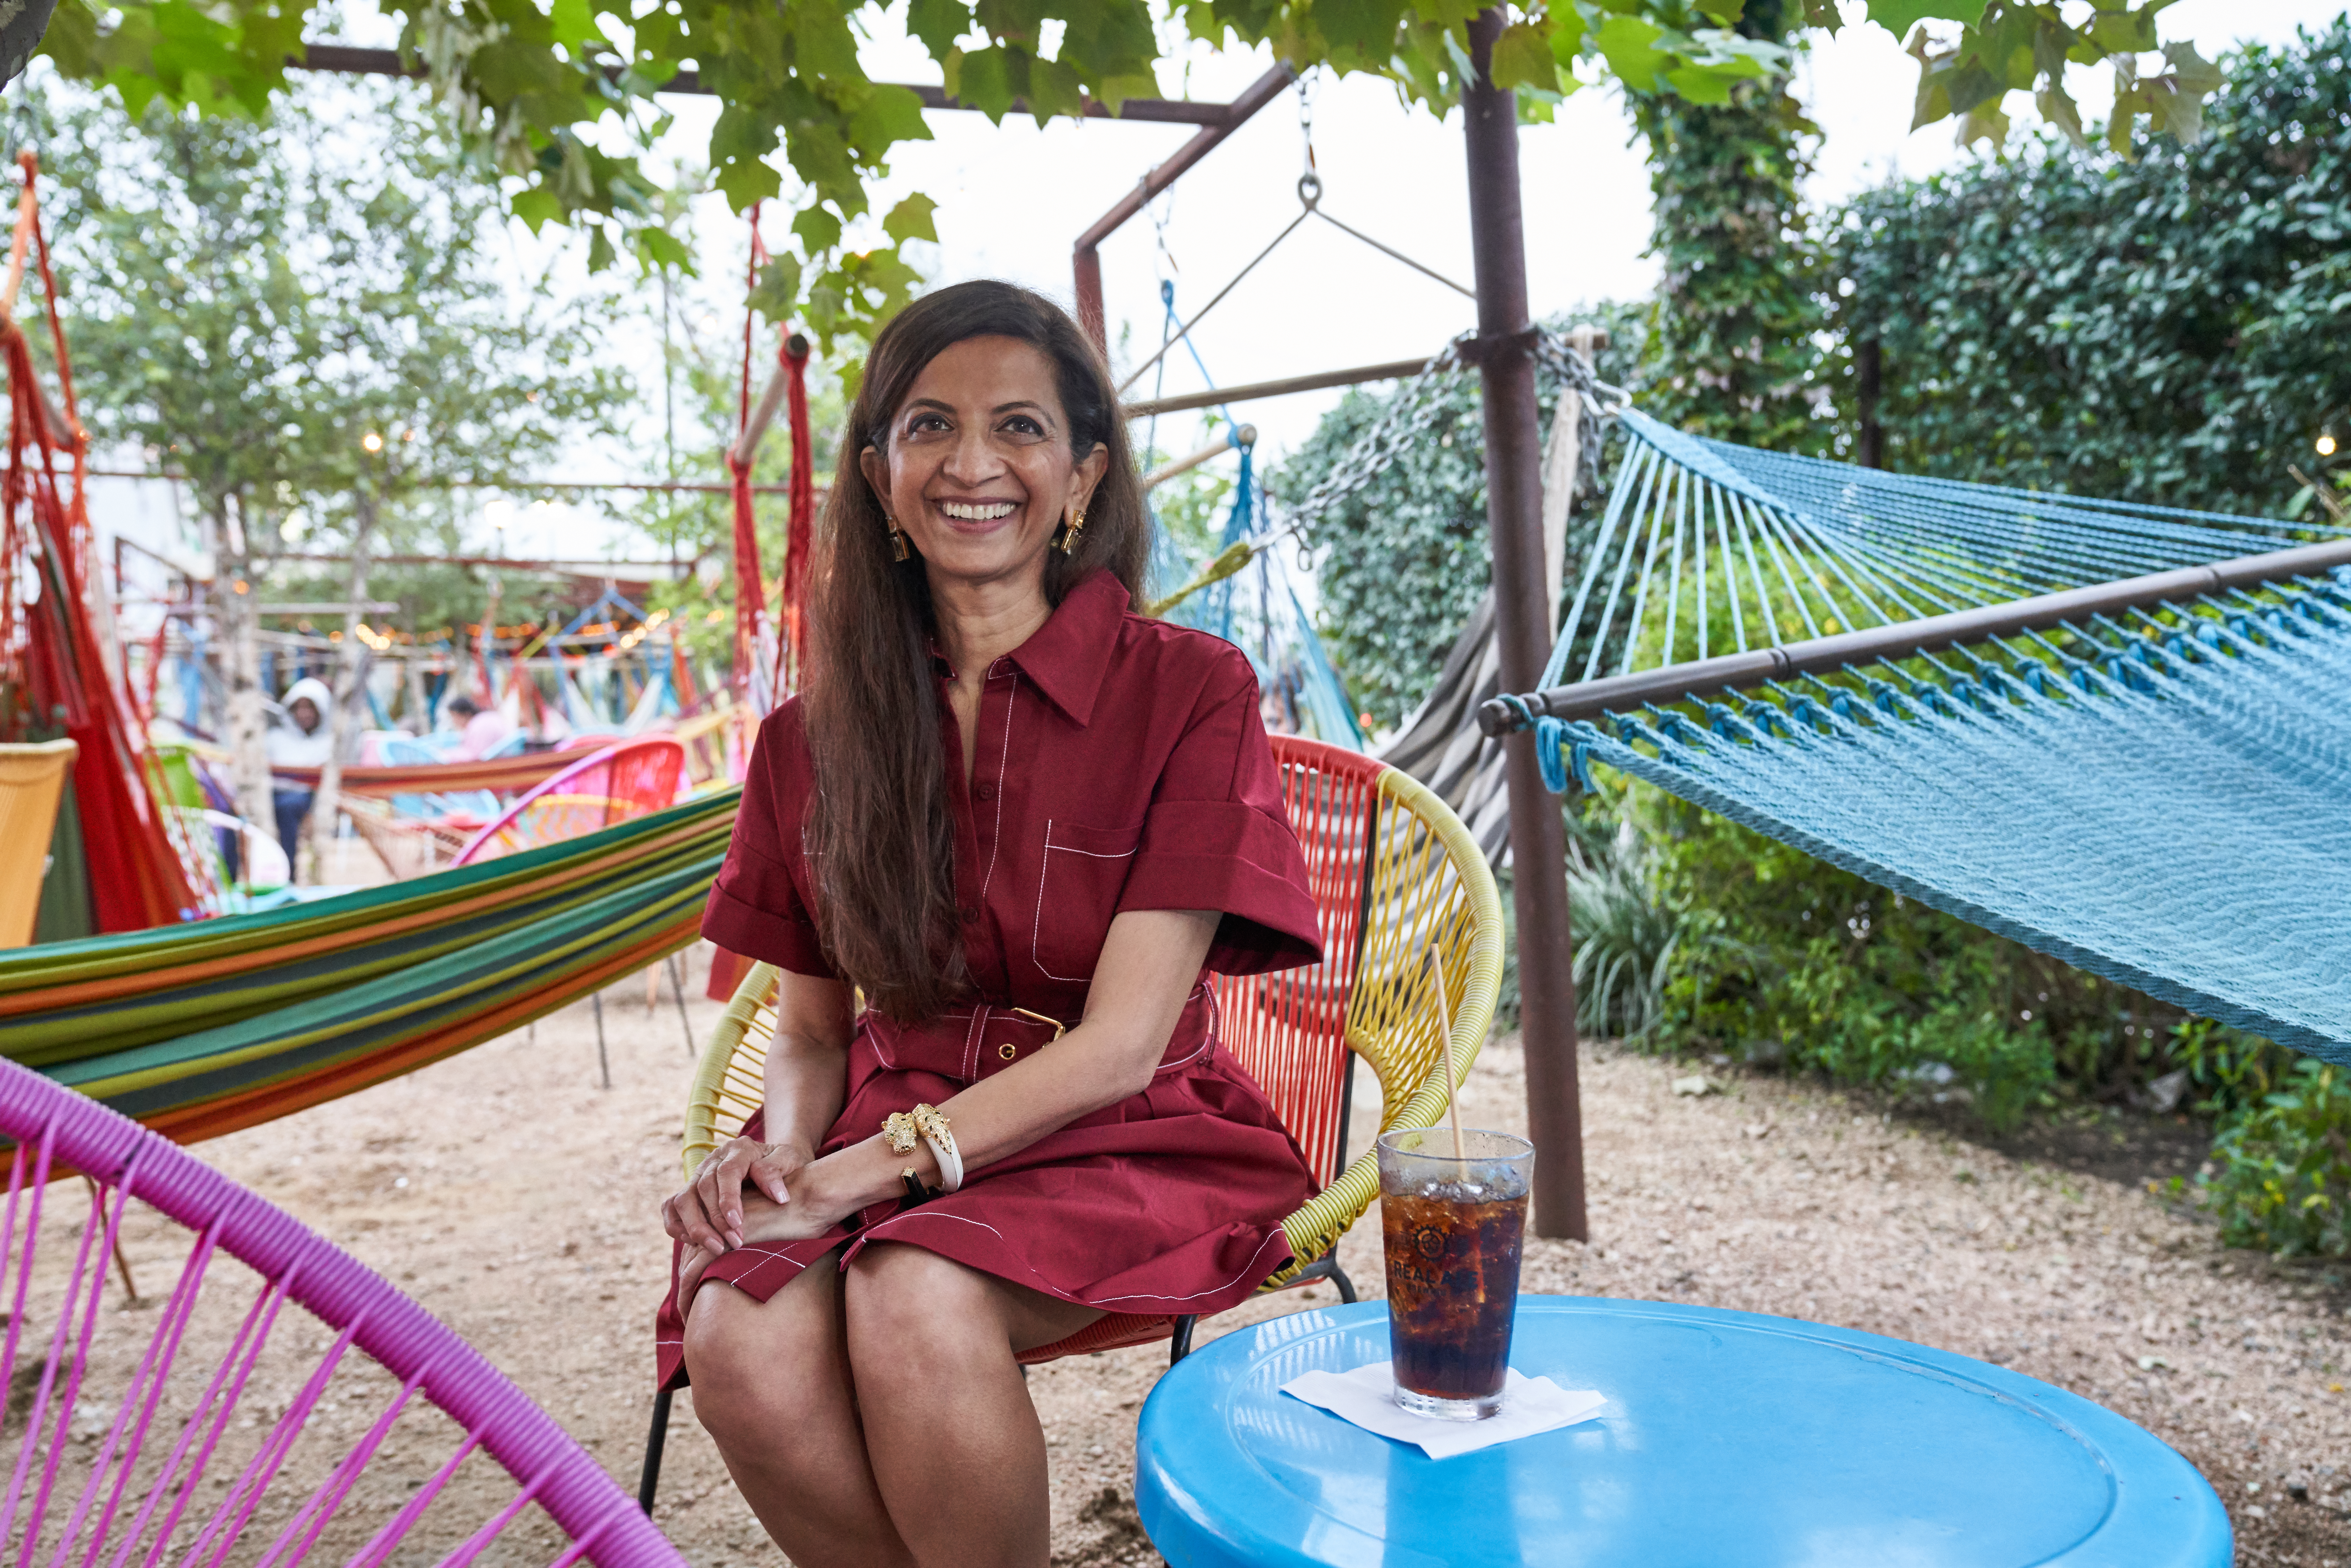 Woman sitting in hammock outside smiling at camera